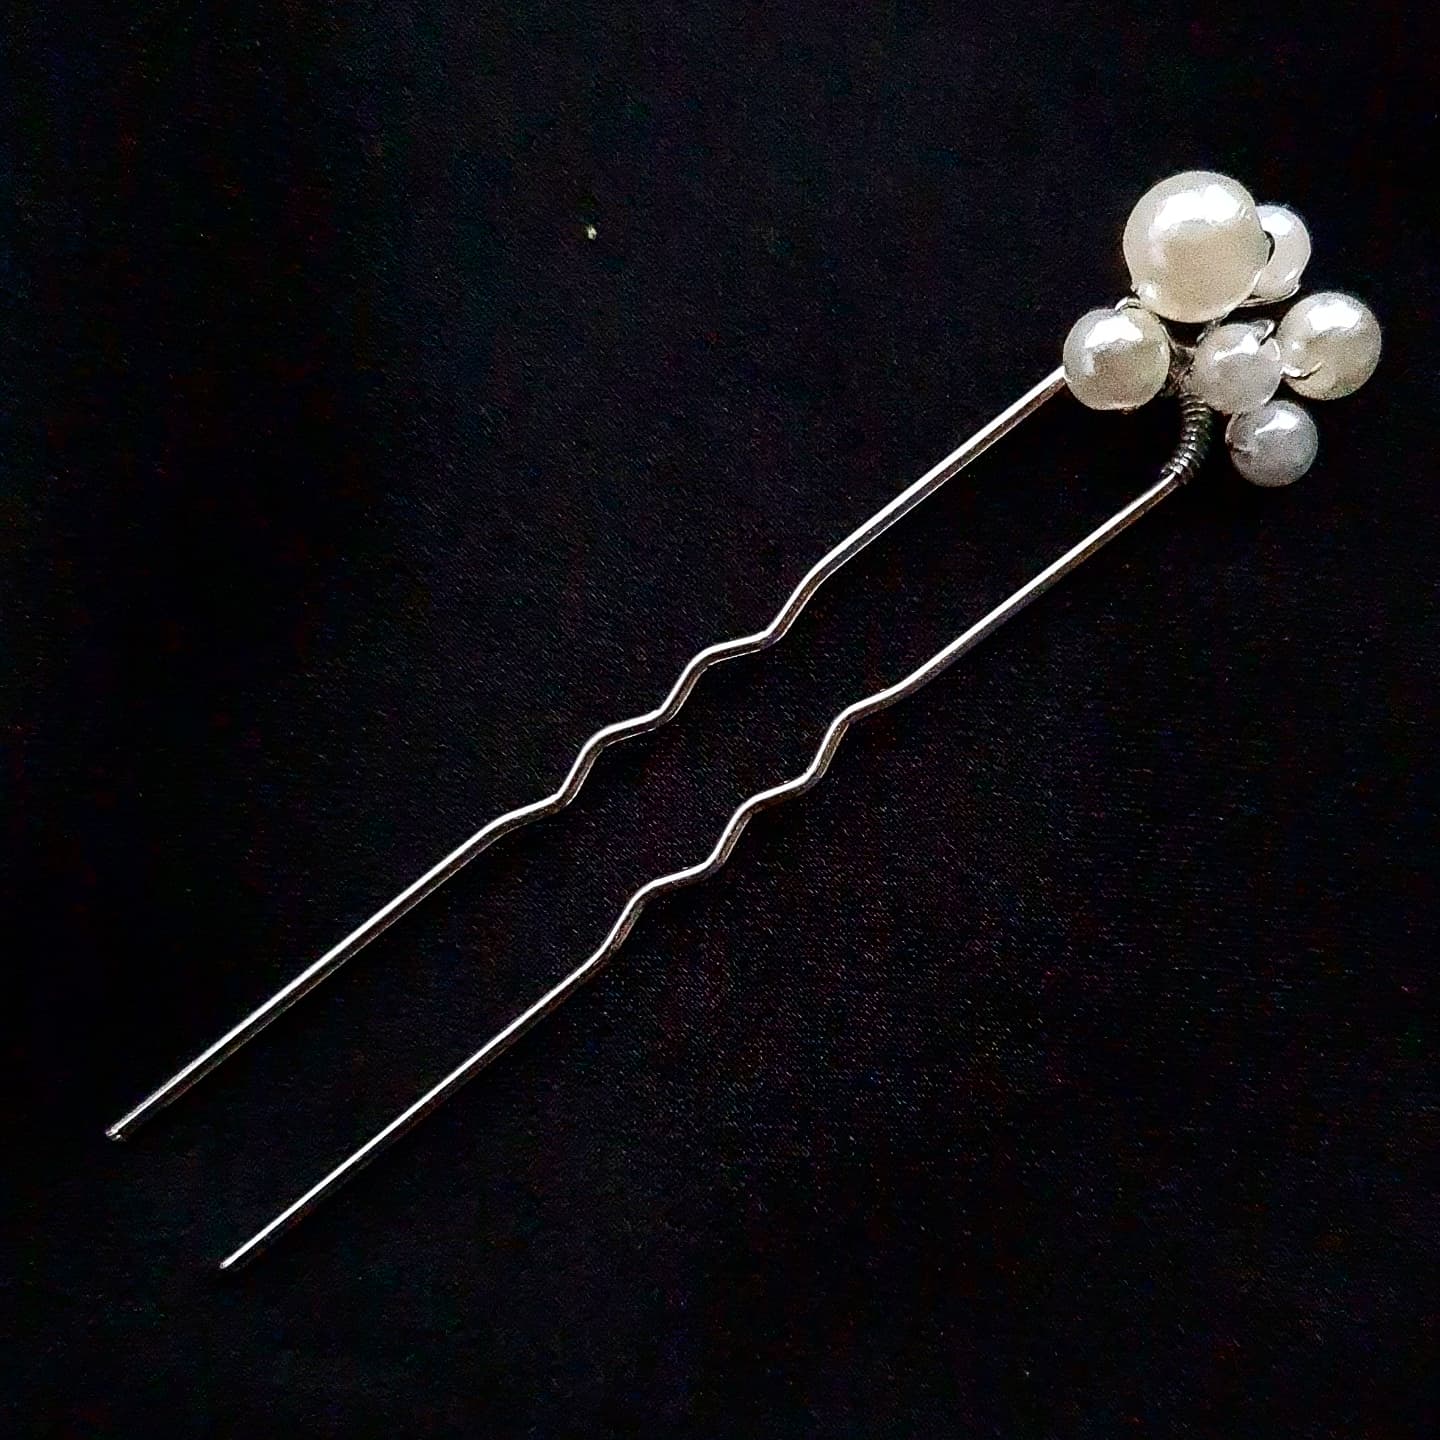 a hair pins with pearls on them. The hair pin is made of metal and have pearls of different sizes on them. The hair pin is in white color.